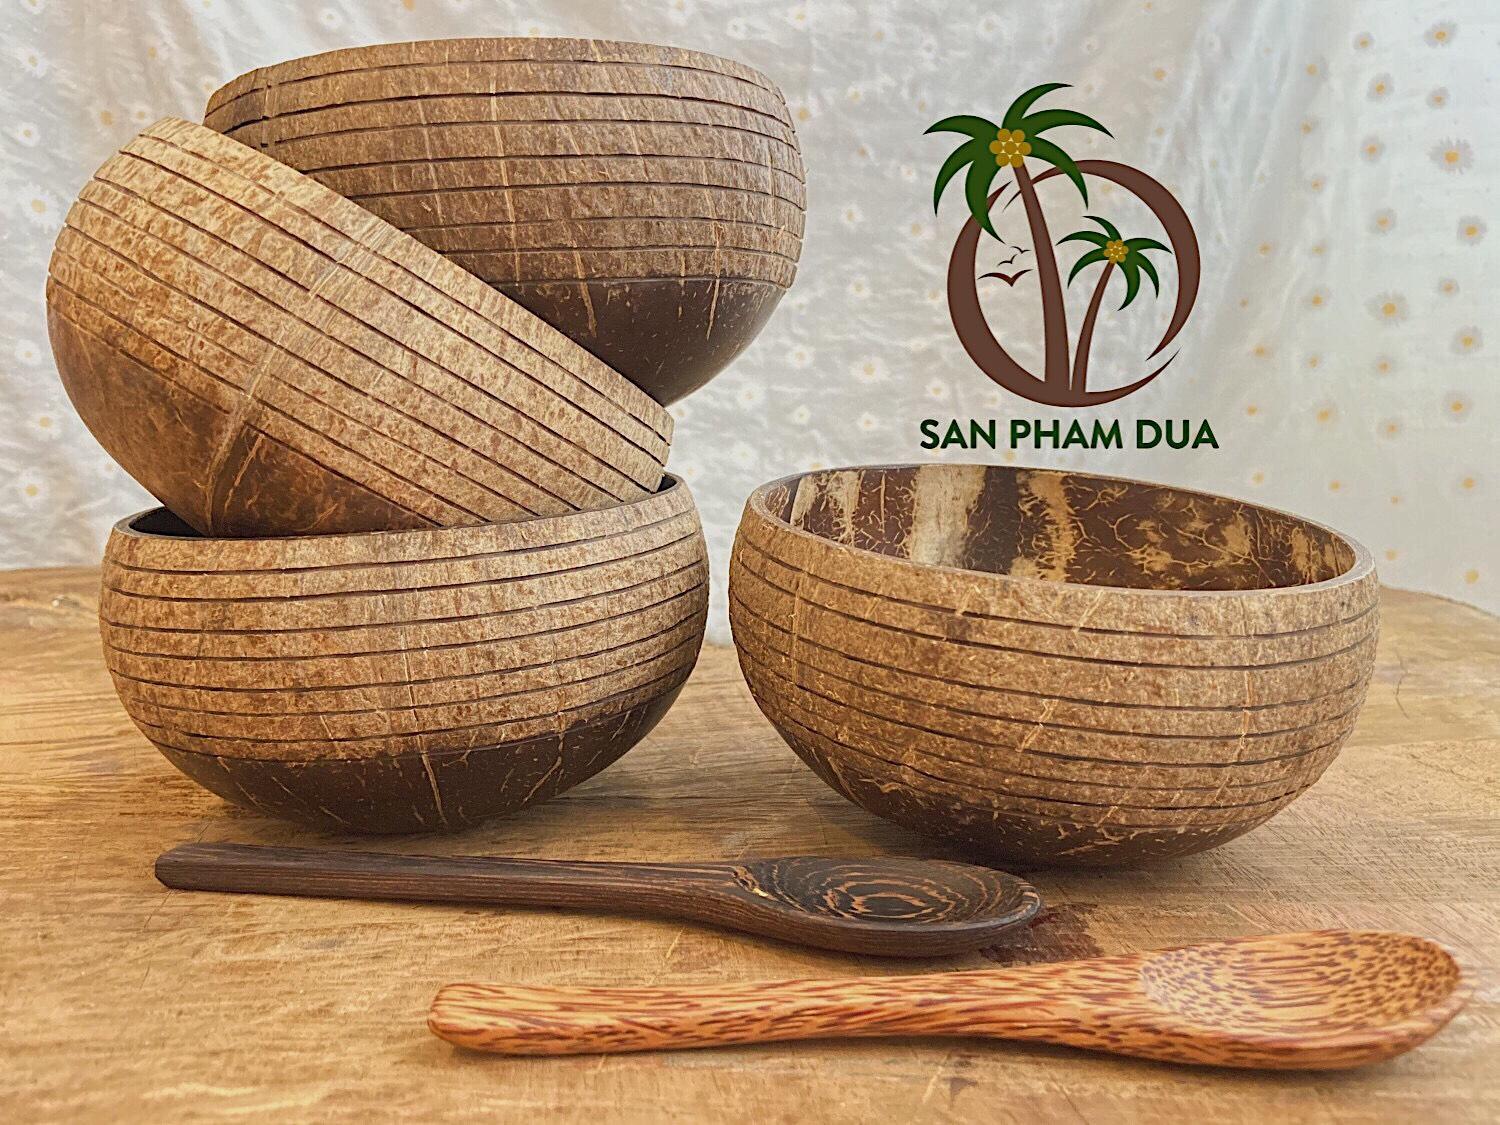 LET’S SAVE THE EARTH – USING COCONUT SHELL BOWLS